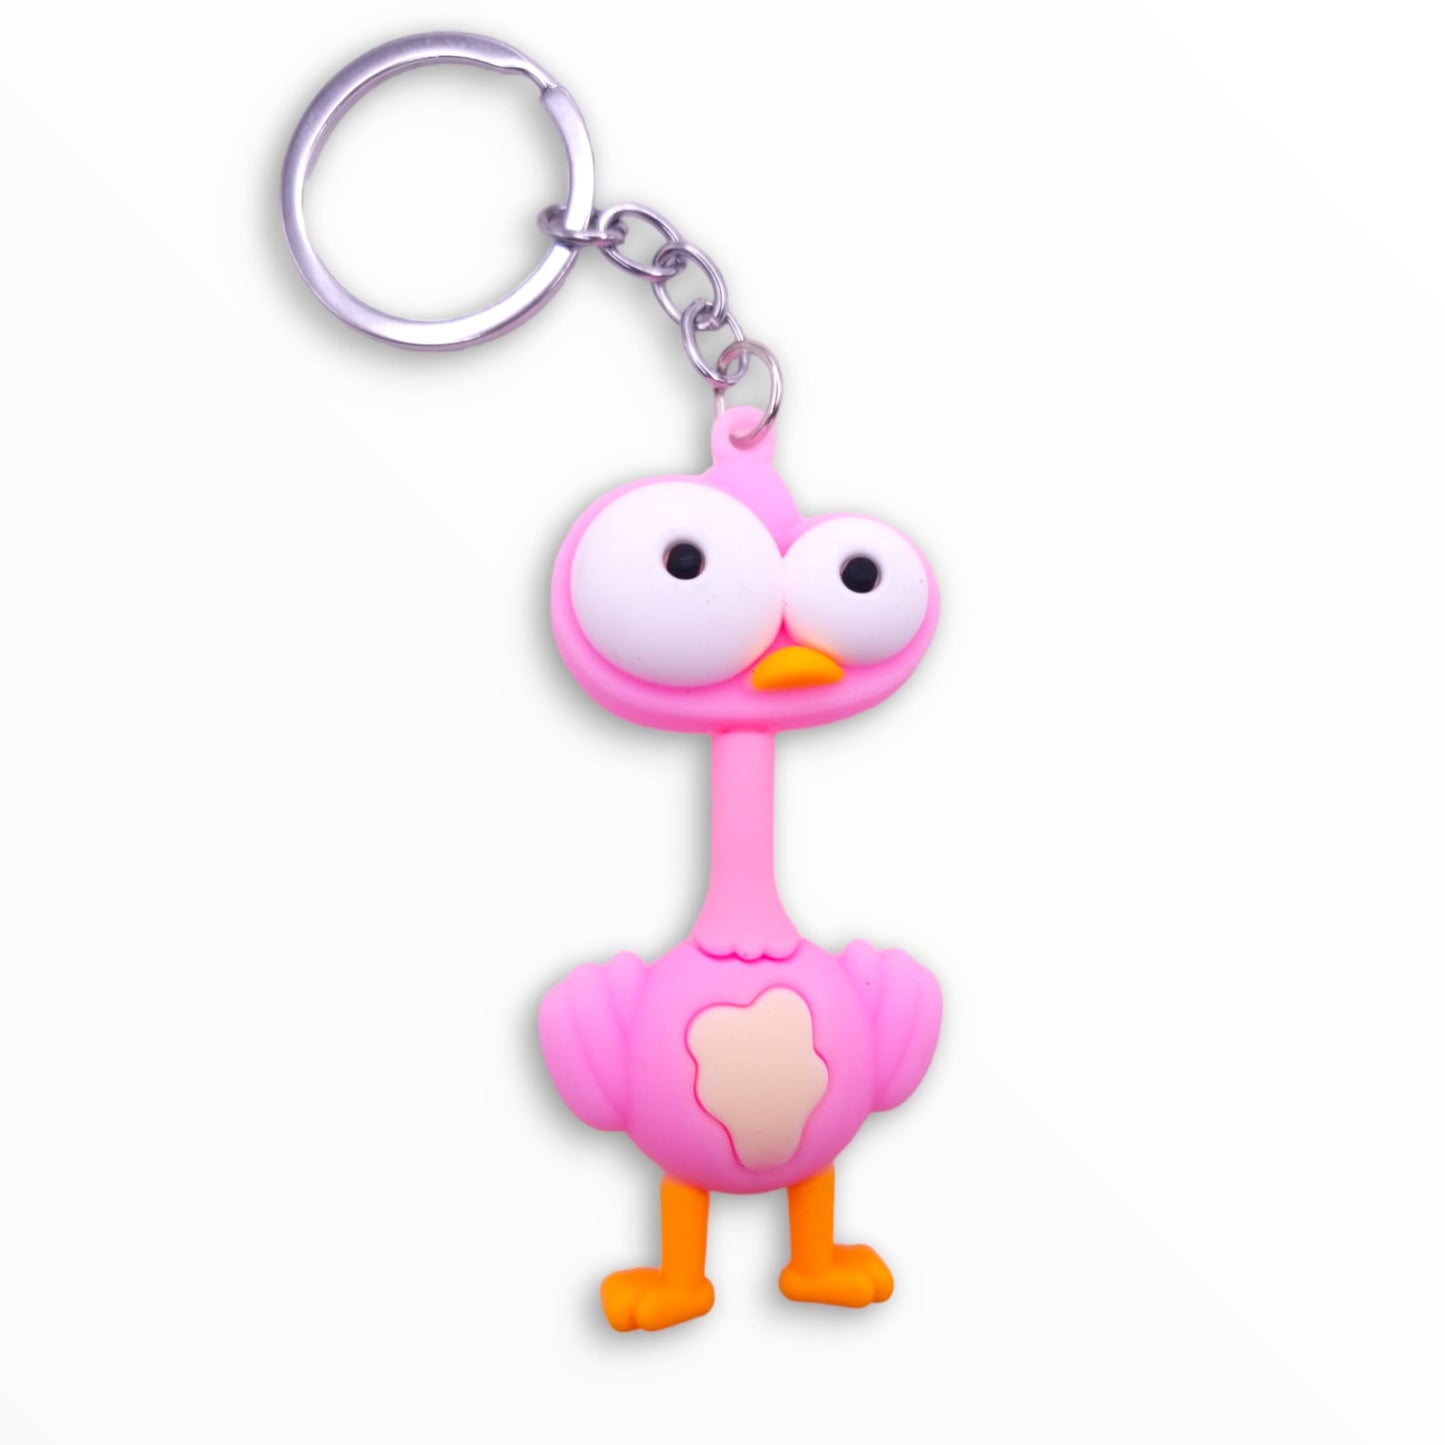 Funny Pink Bird Keychain from Confetti Kitty, Only 5